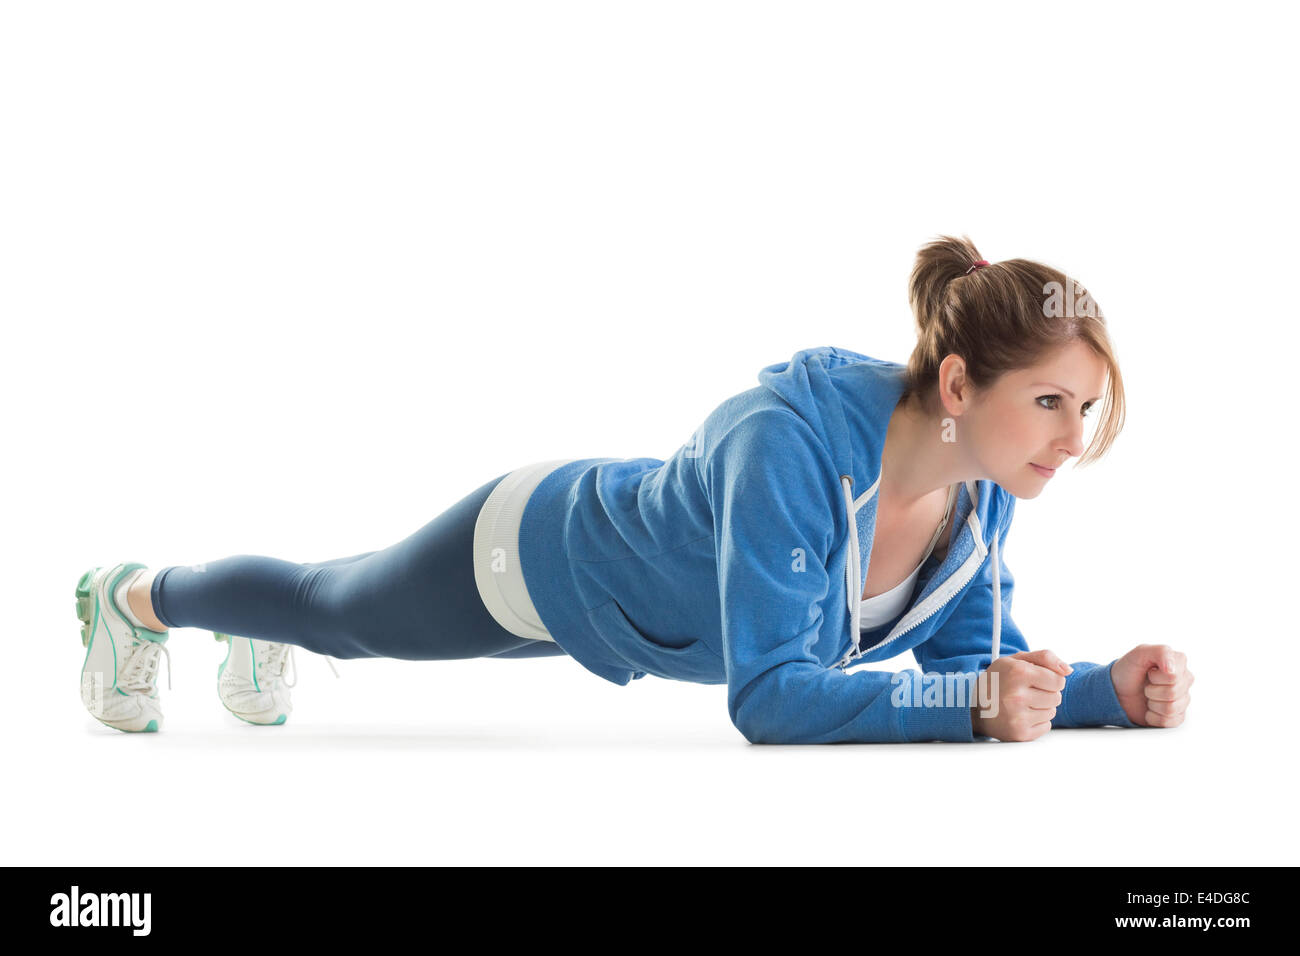 Young woman in basic plank posture Stock Photo